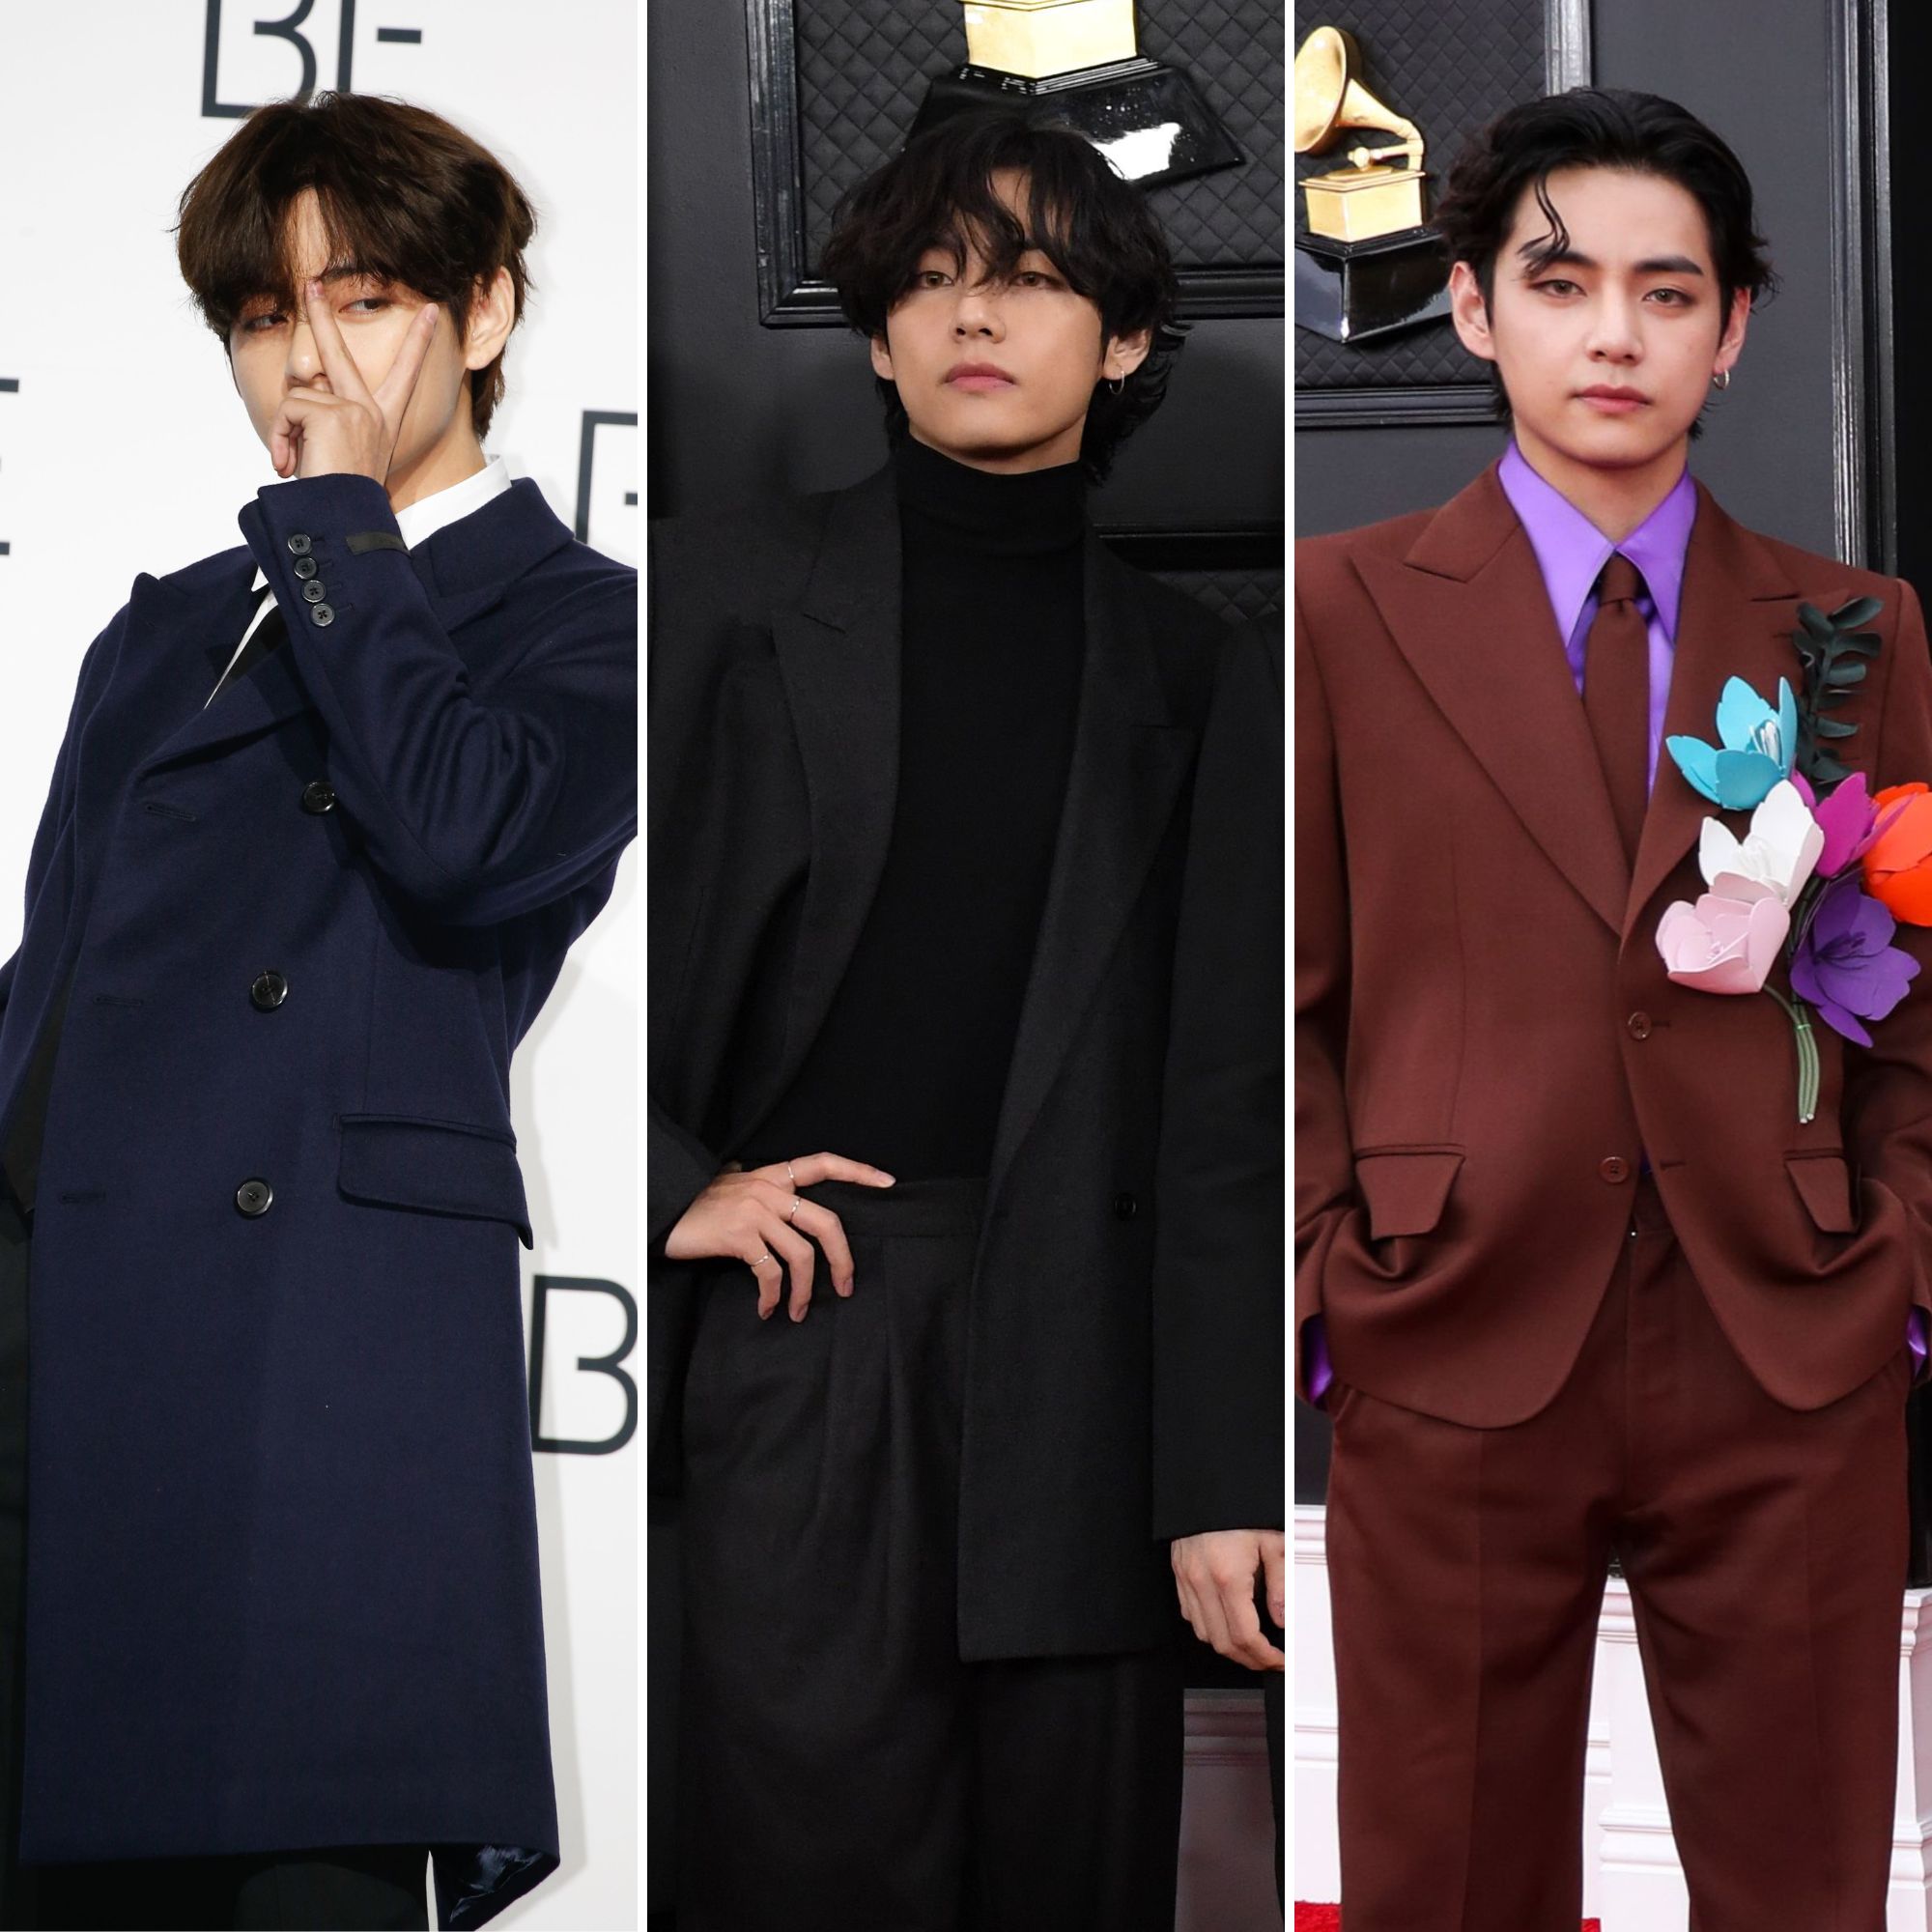 Kim Taehyung has been confirmed to the new Celine Global